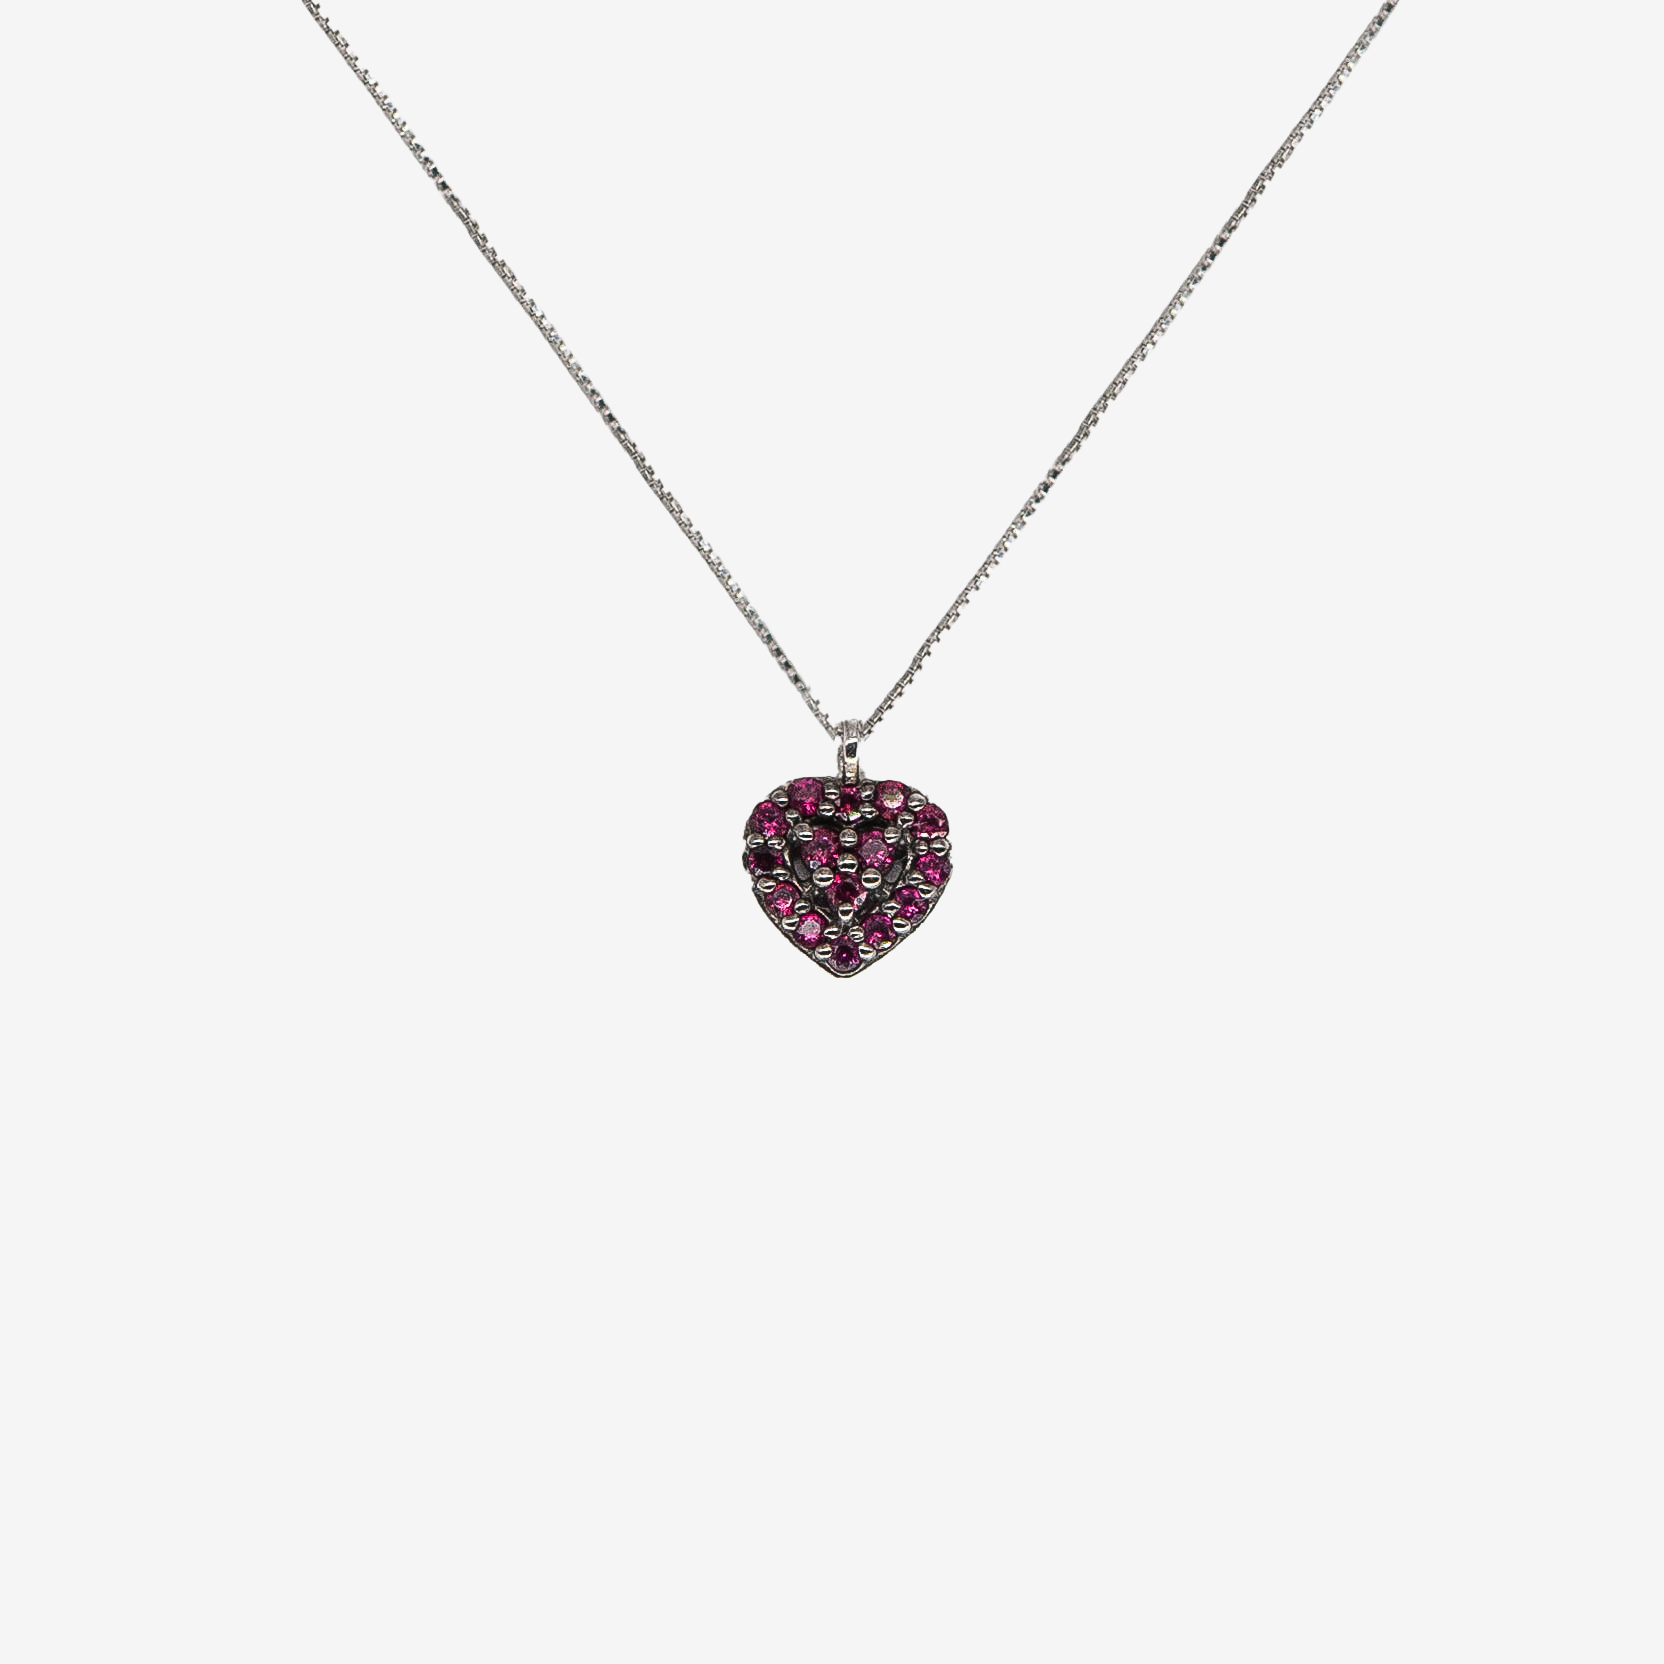 Heart necklace with rubies